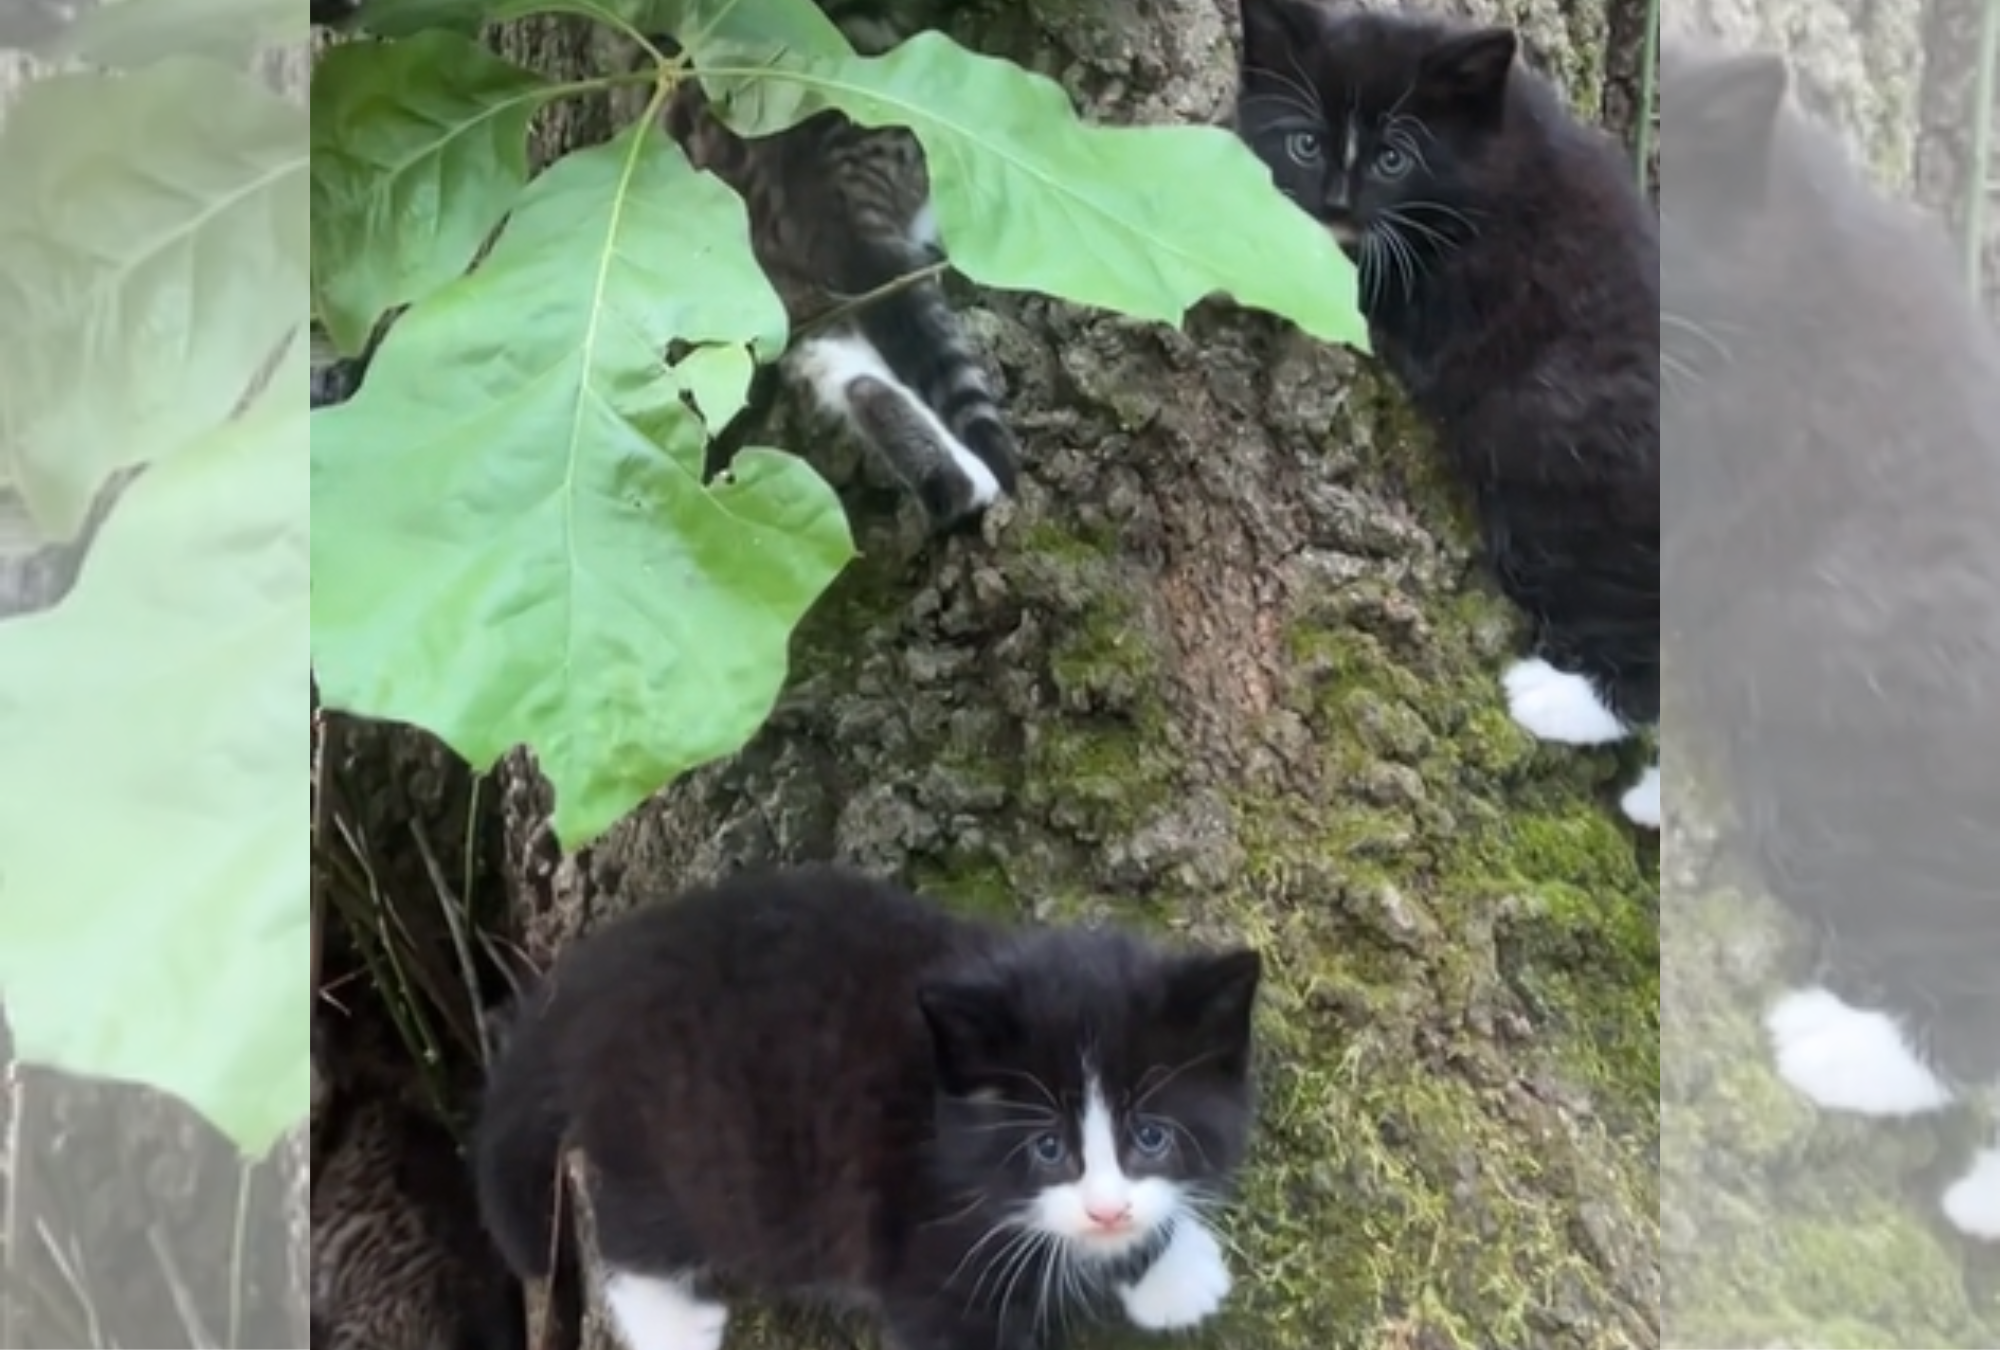 Woman discovers stray cat kittens on her tree, everyone asks same question